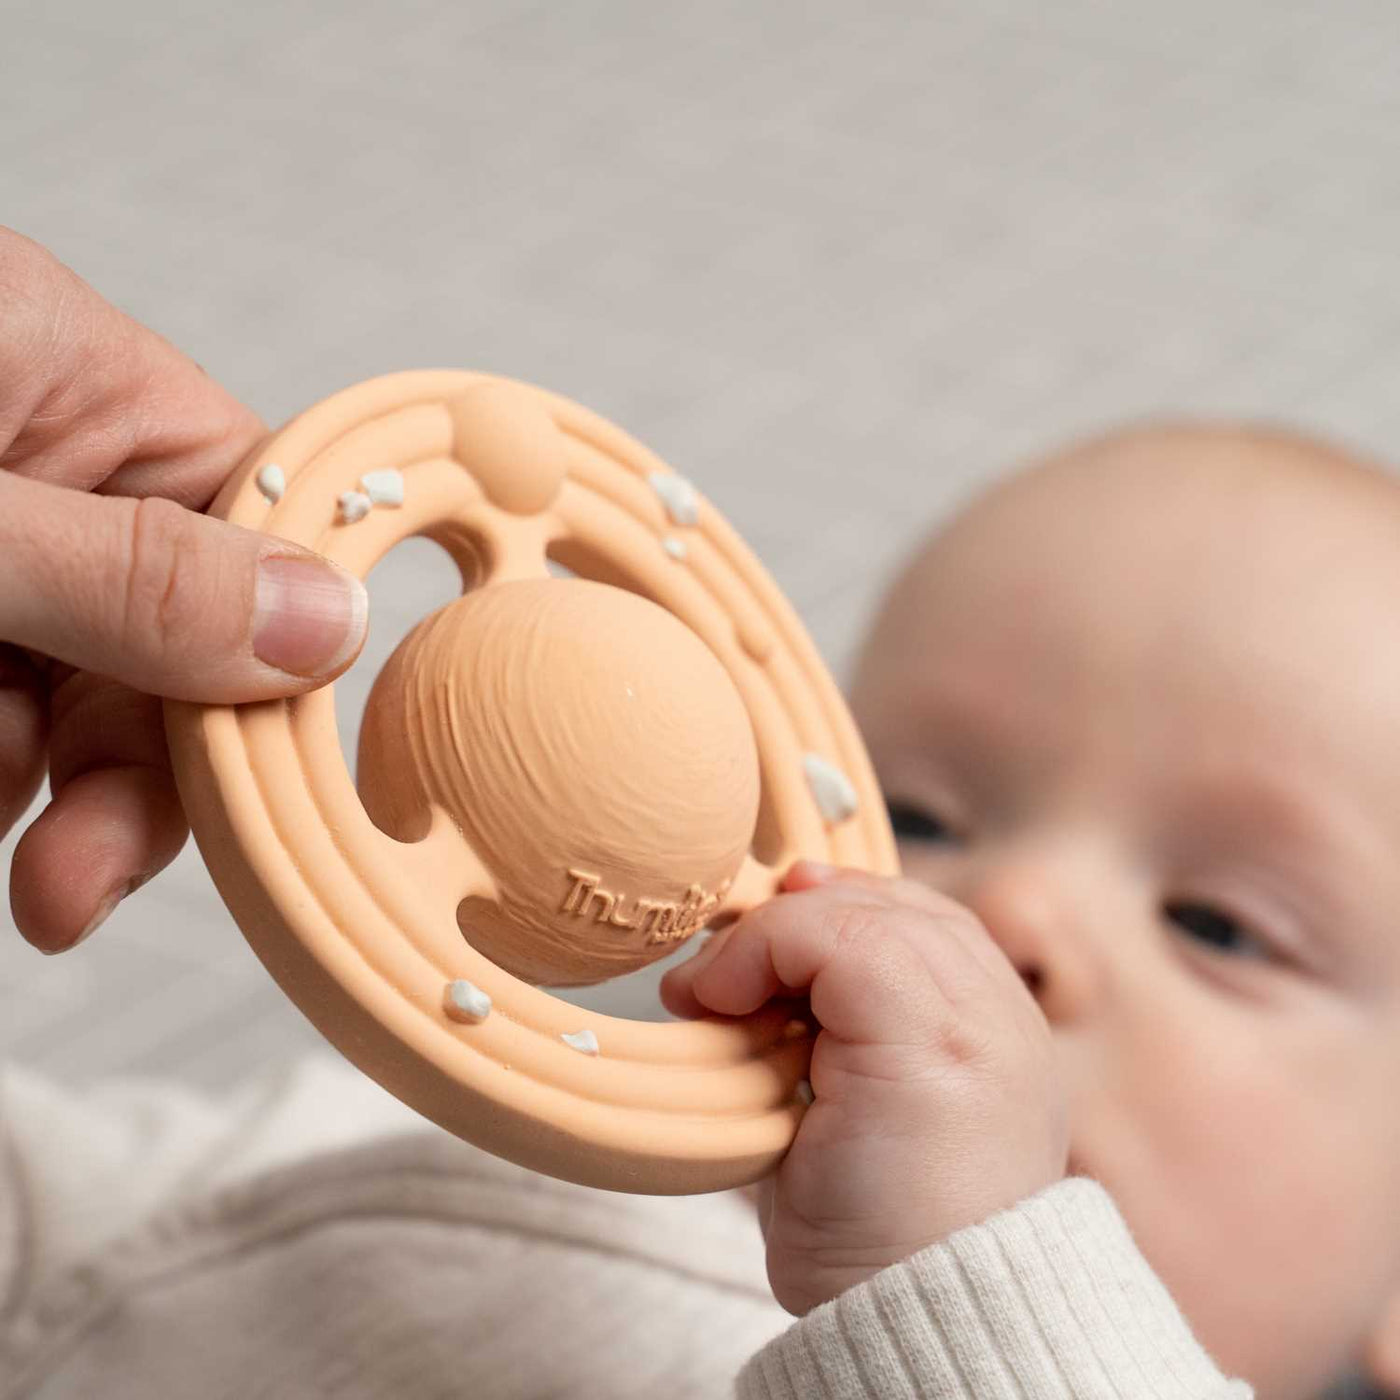 Baby easily grasping a Planet CH3W planet shaped teether